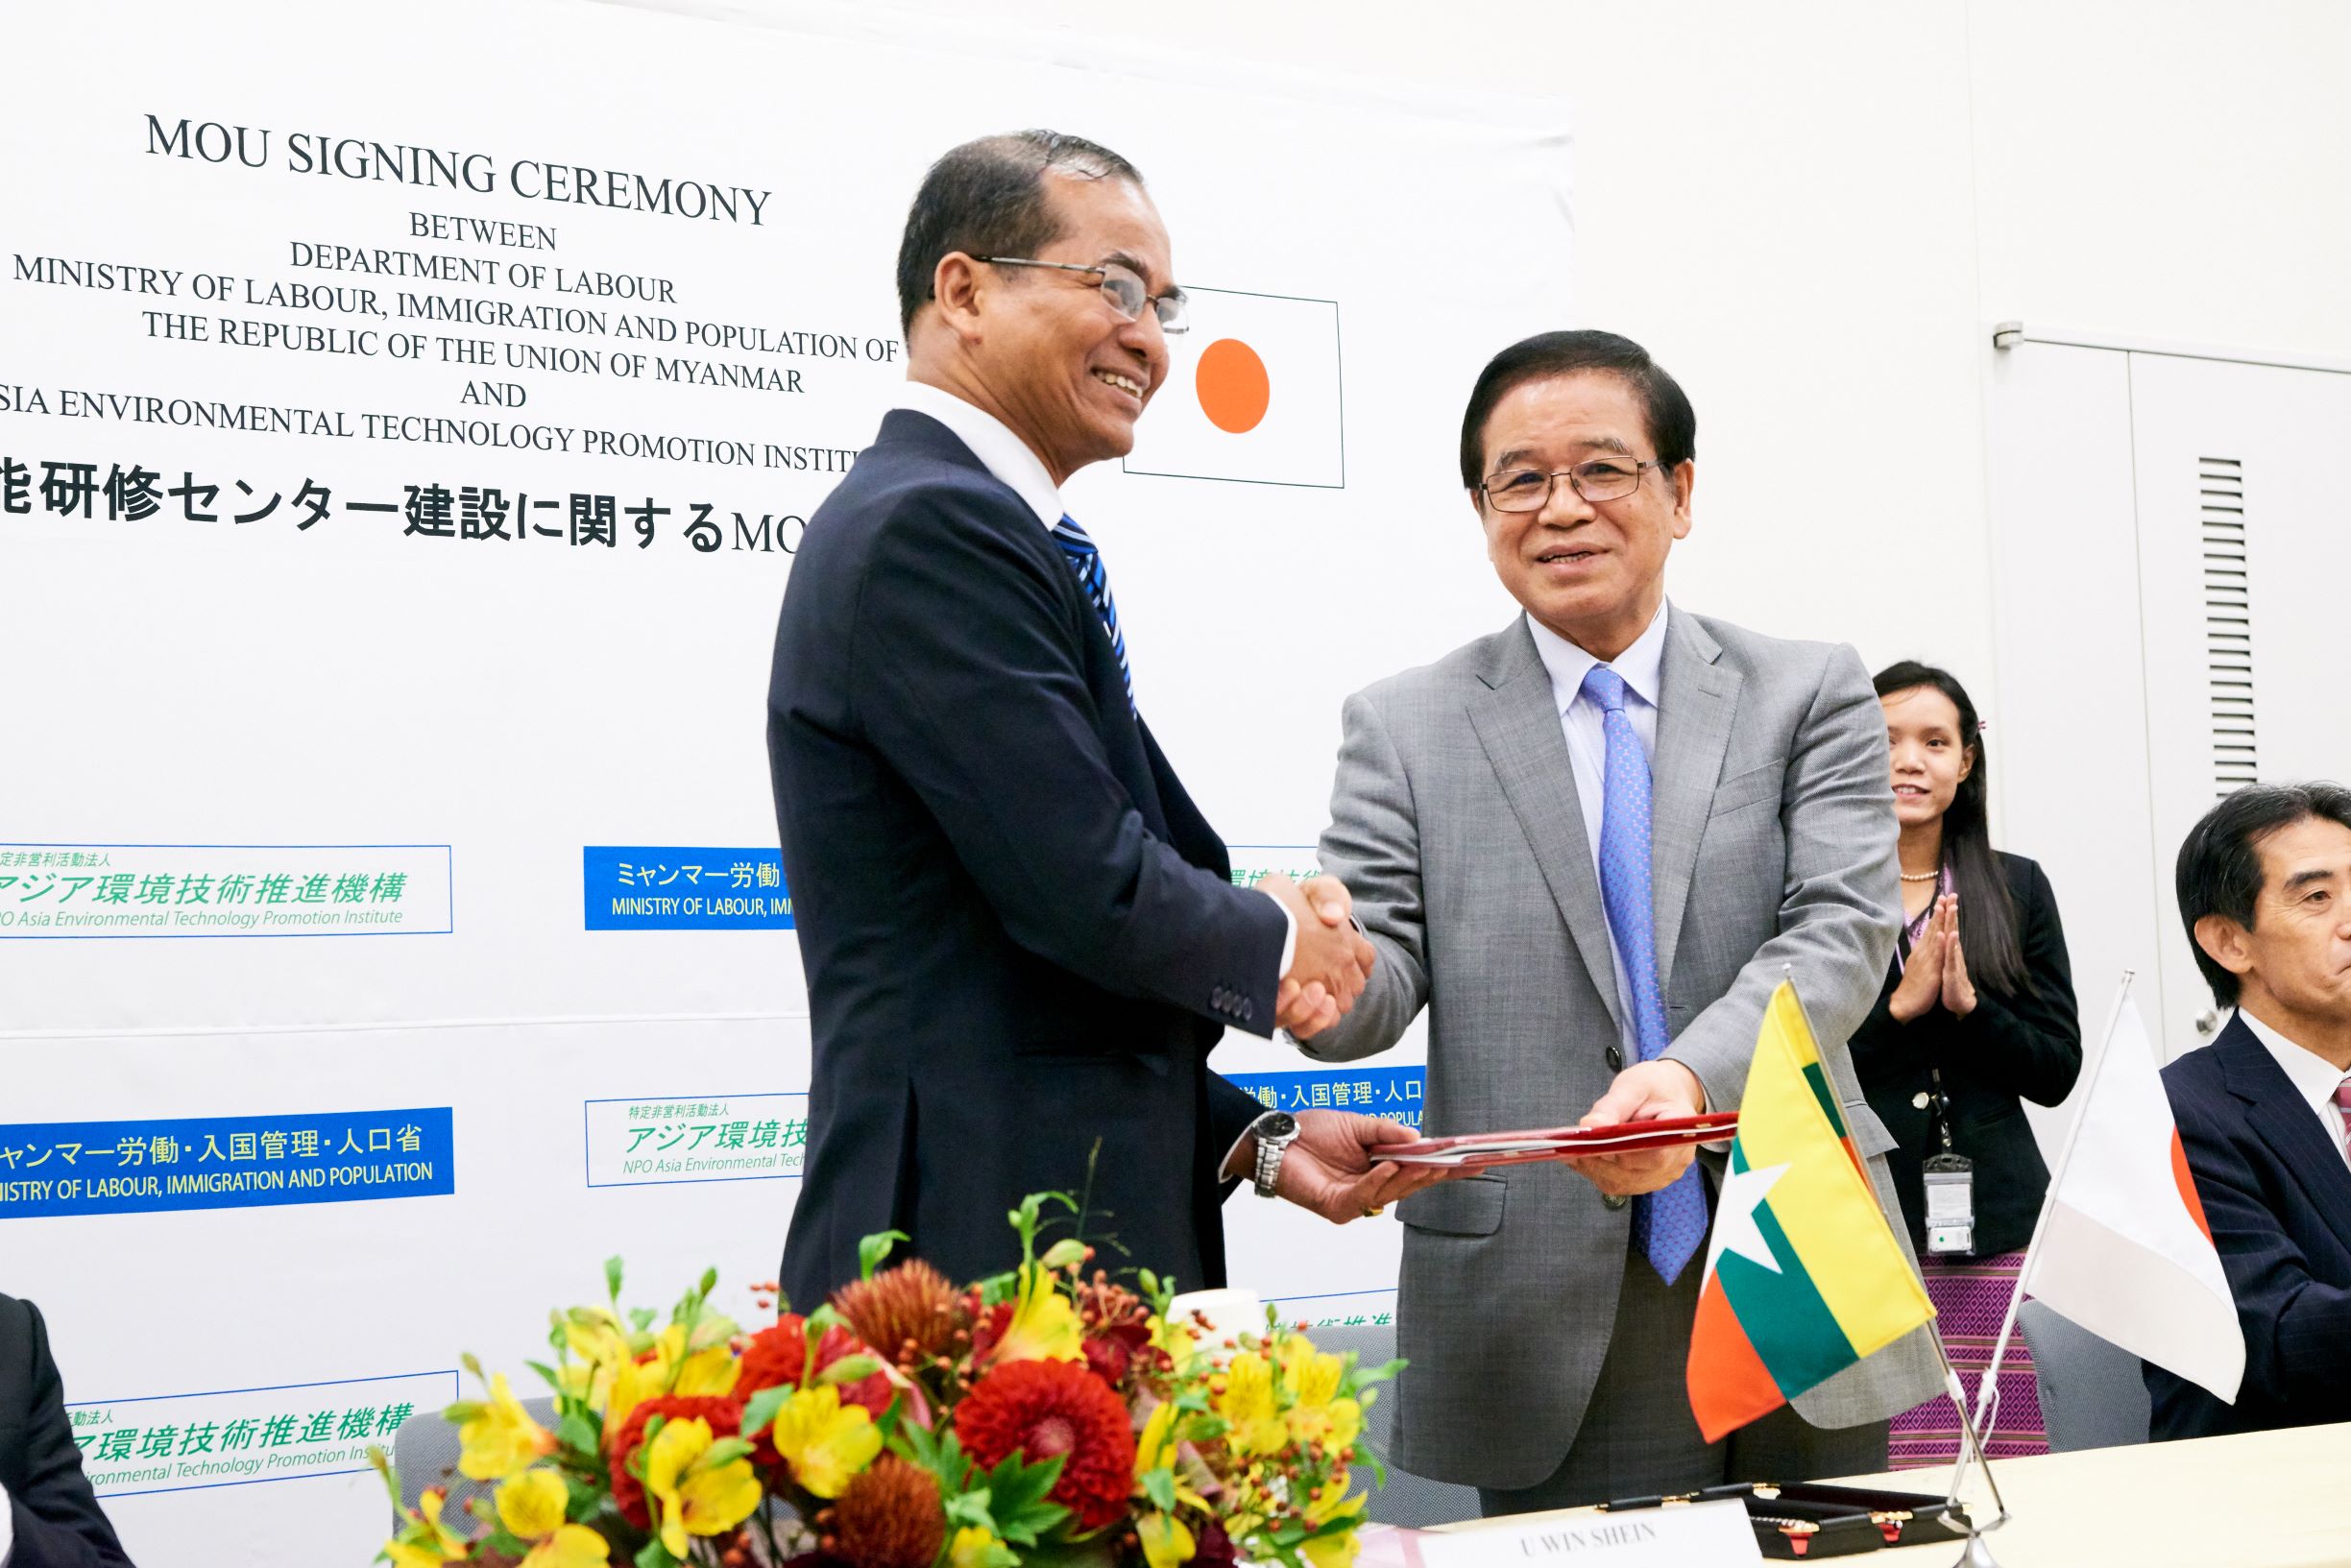 MOU Signing Ceremony with Myanmar Labor Ministry on the Technical Training Center